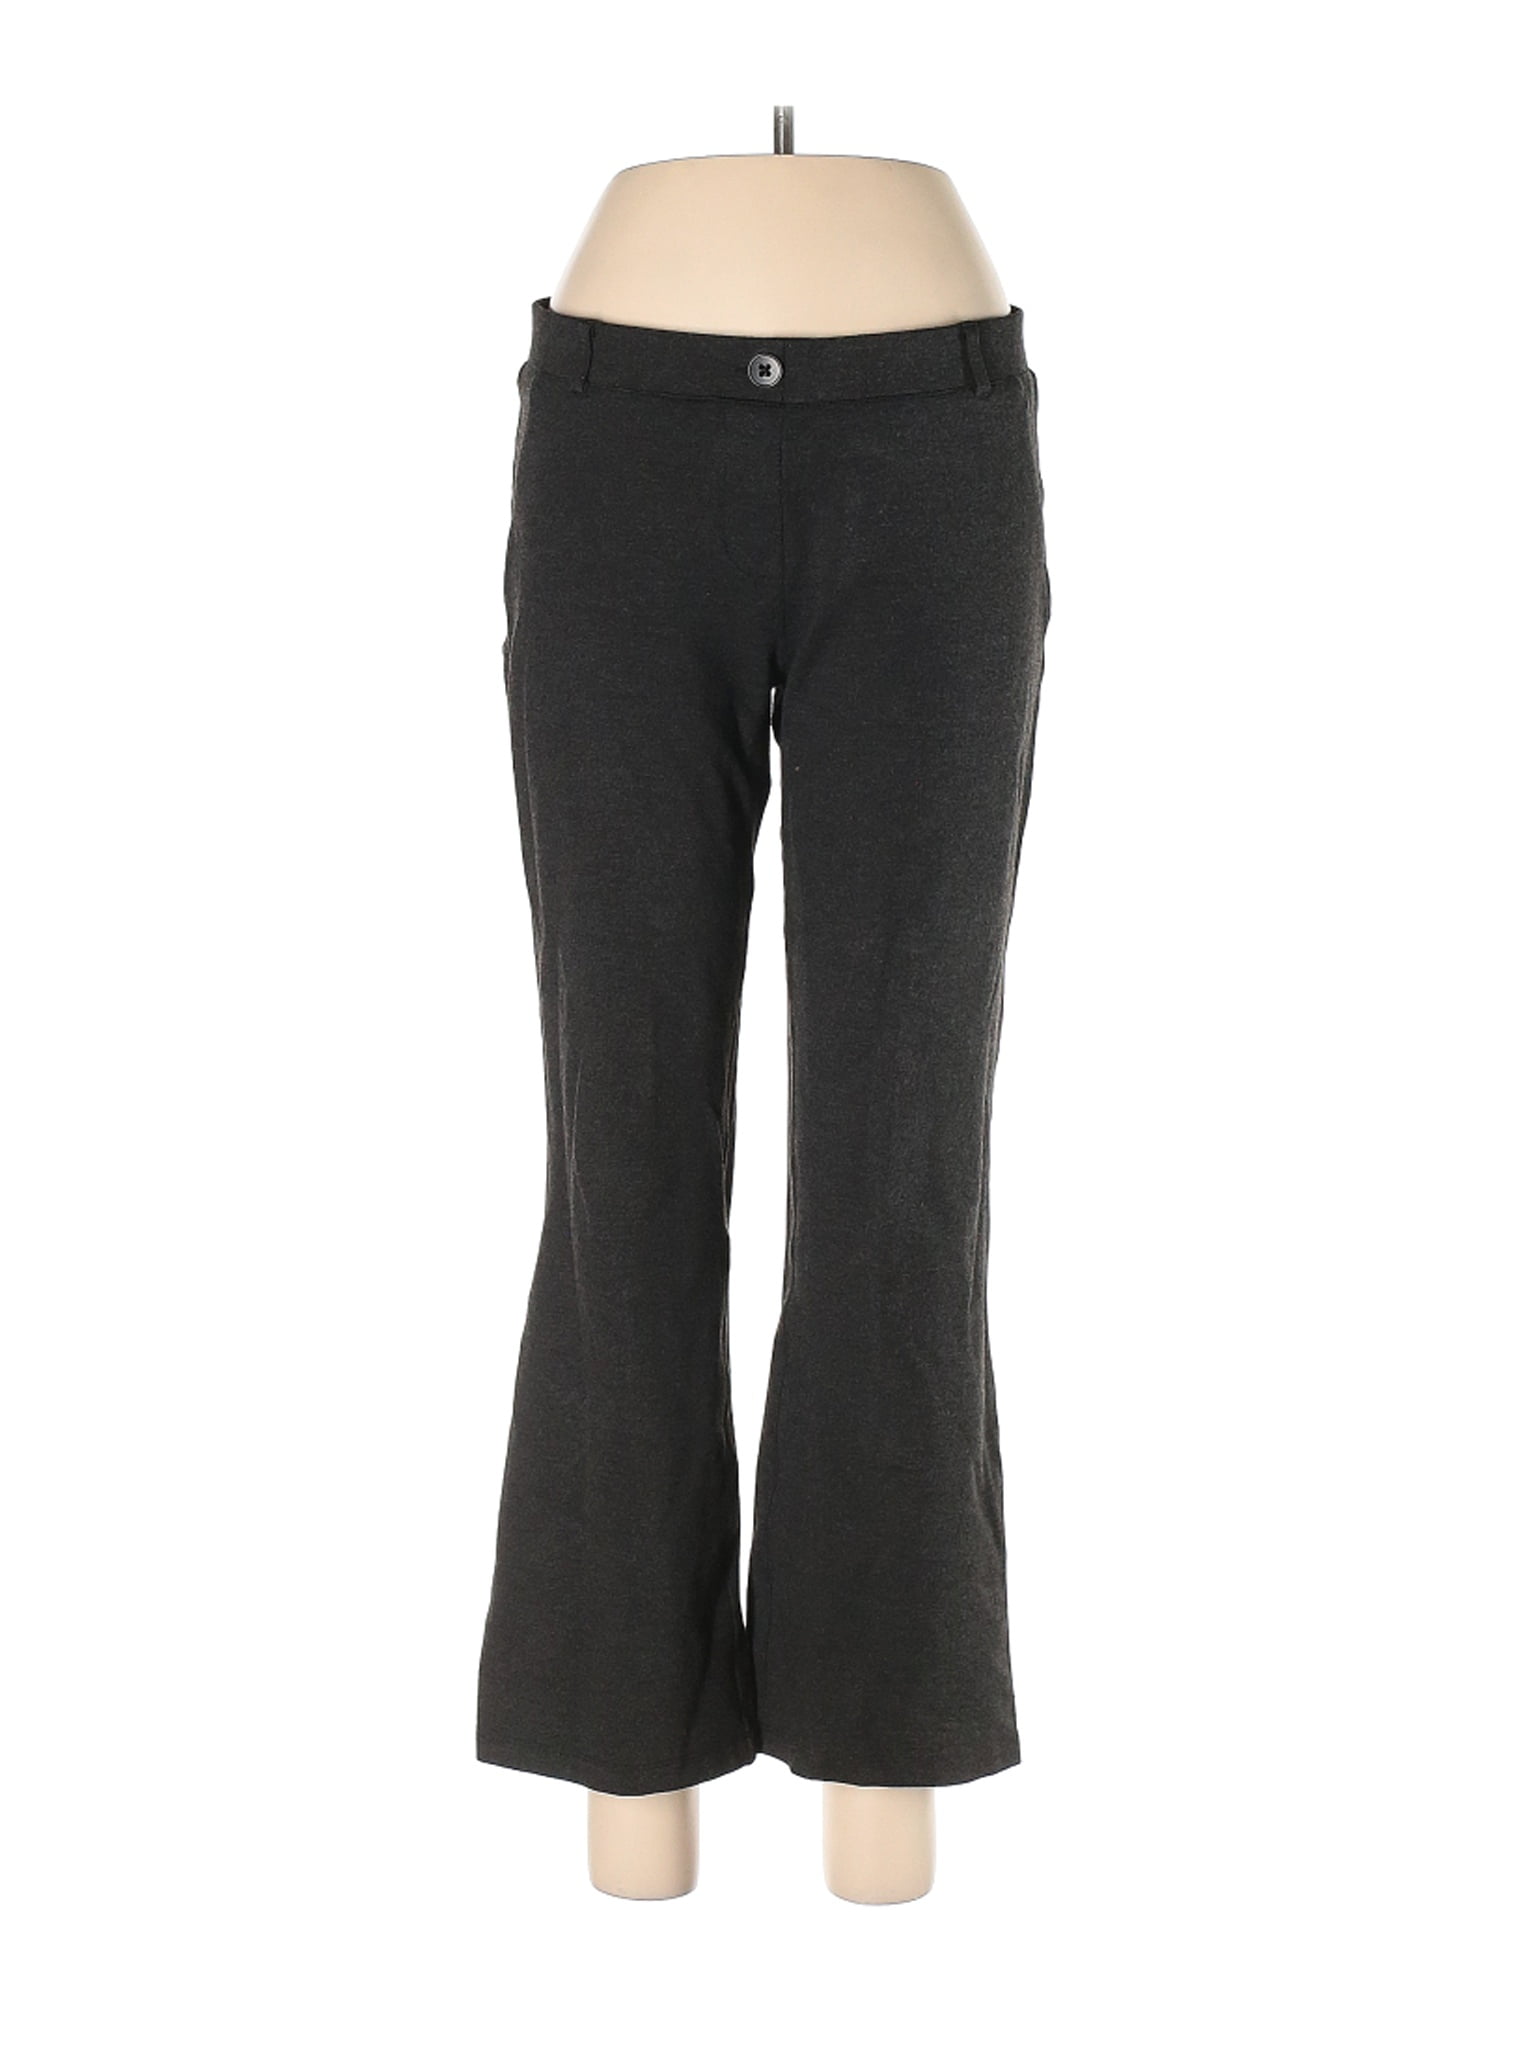 Betabrand - Pre-Owned Betabrand Women's Size L Casual Pants - Walmart ...